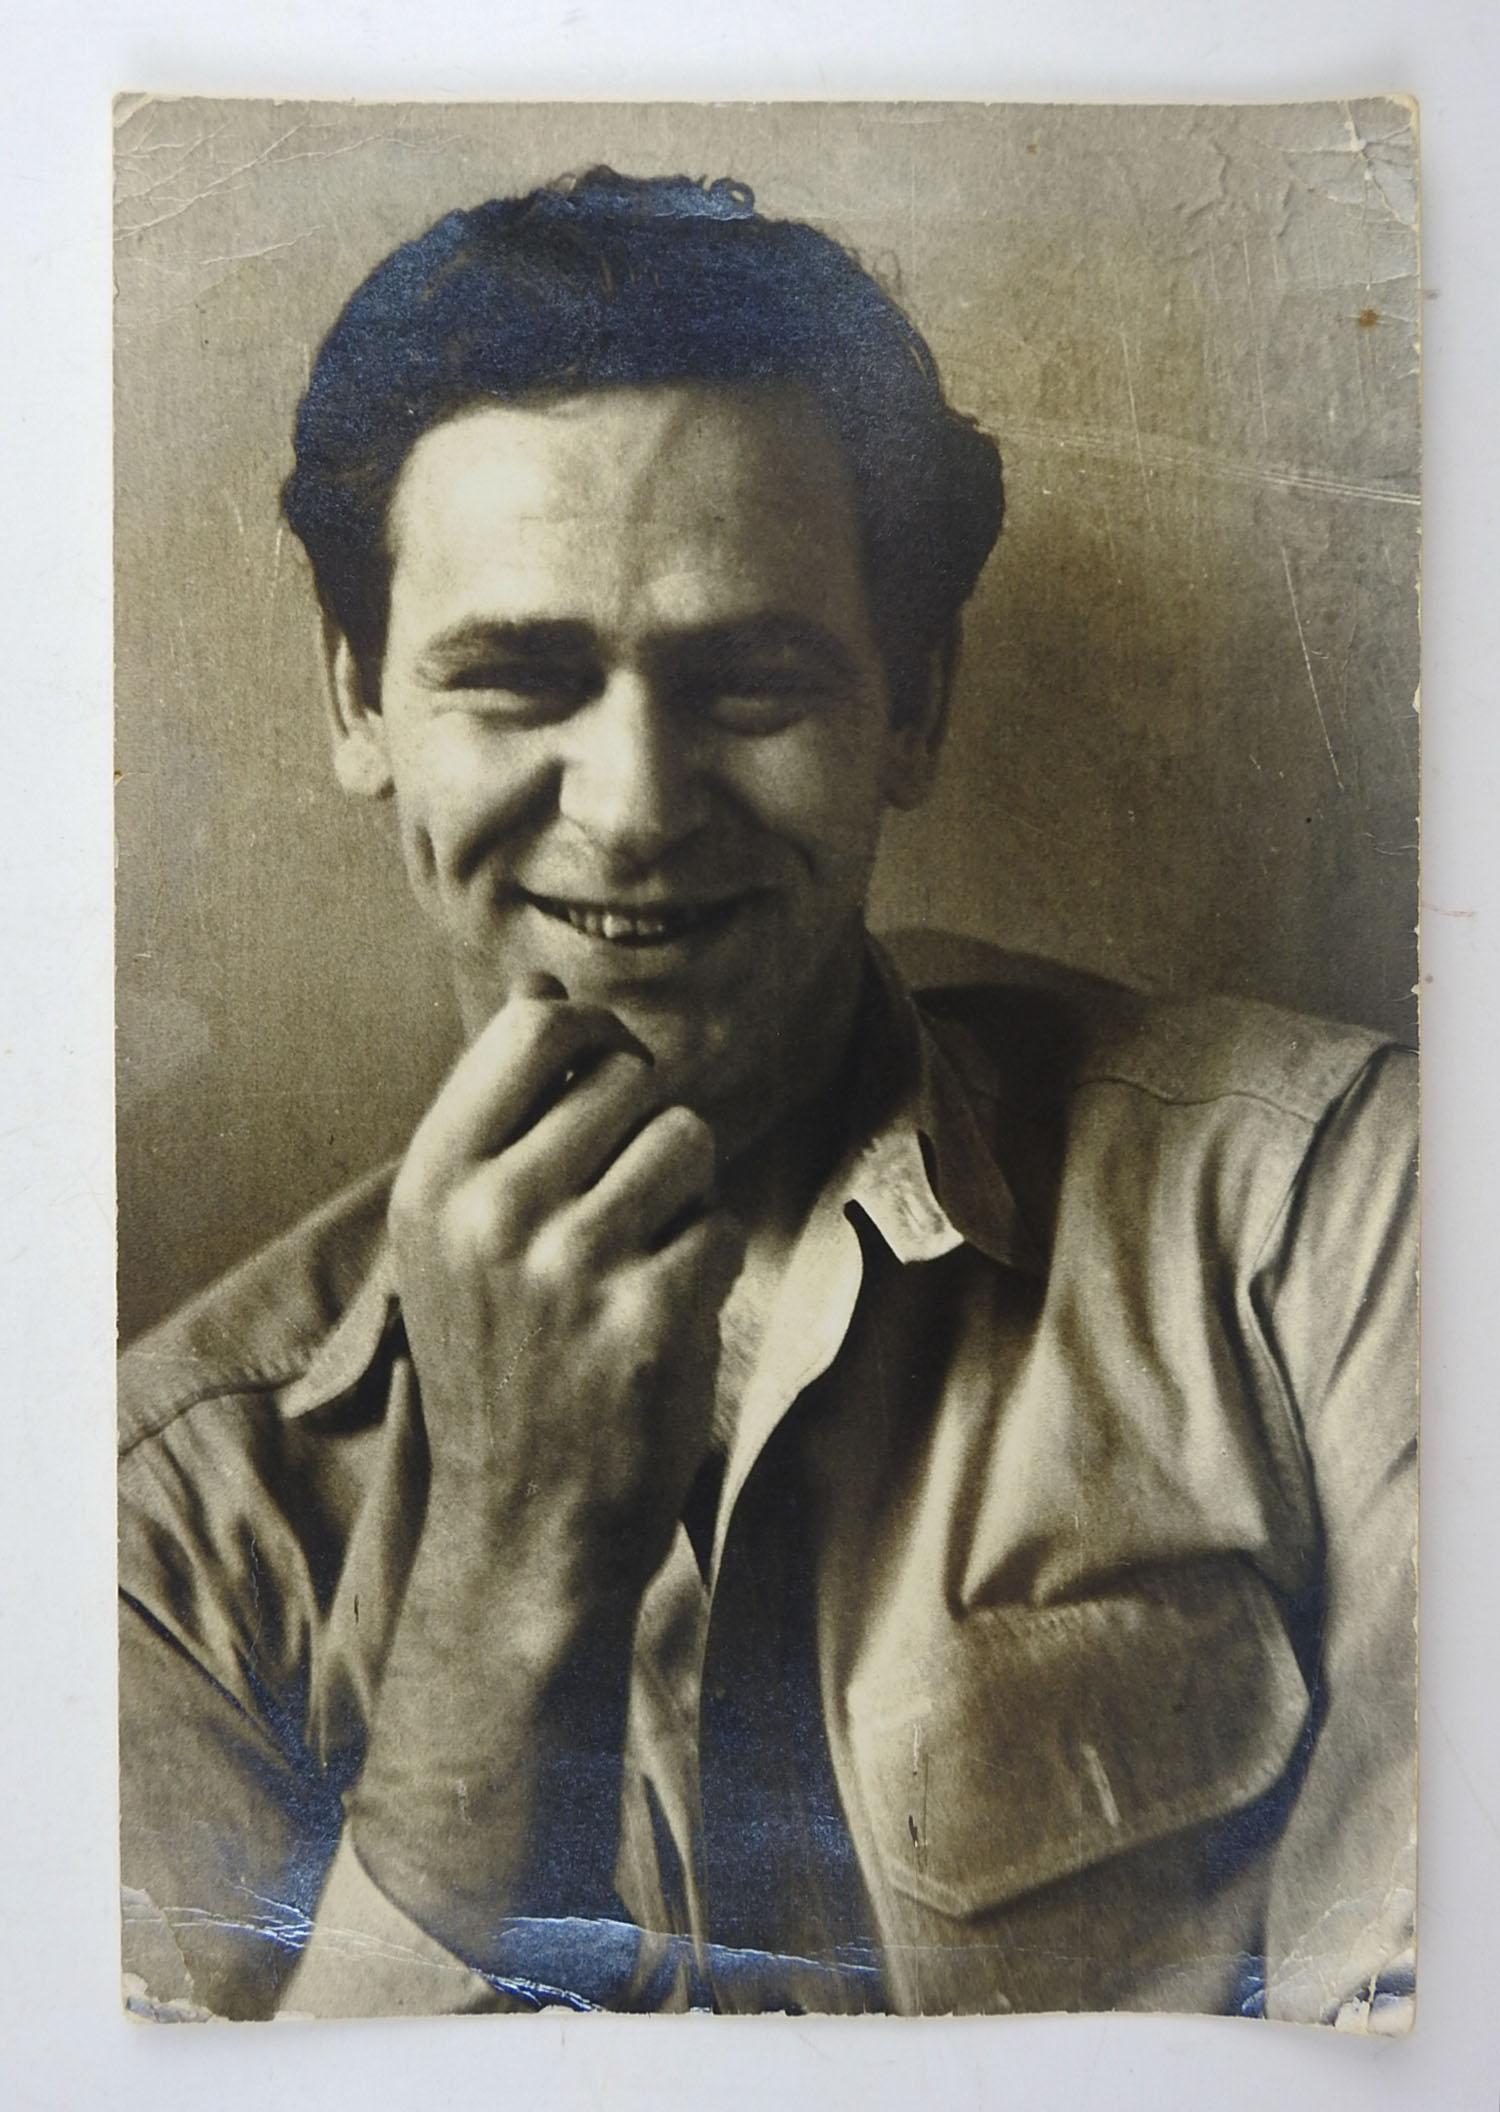 2 photographs circa 1945 by Helen Levitt (1913-2009) of Pulitzer Prize winning author James Agee (1909-1955) writer and film critic. These unsigned photos were published in several books about James Agee, but were rarely printed. Larger photo is a